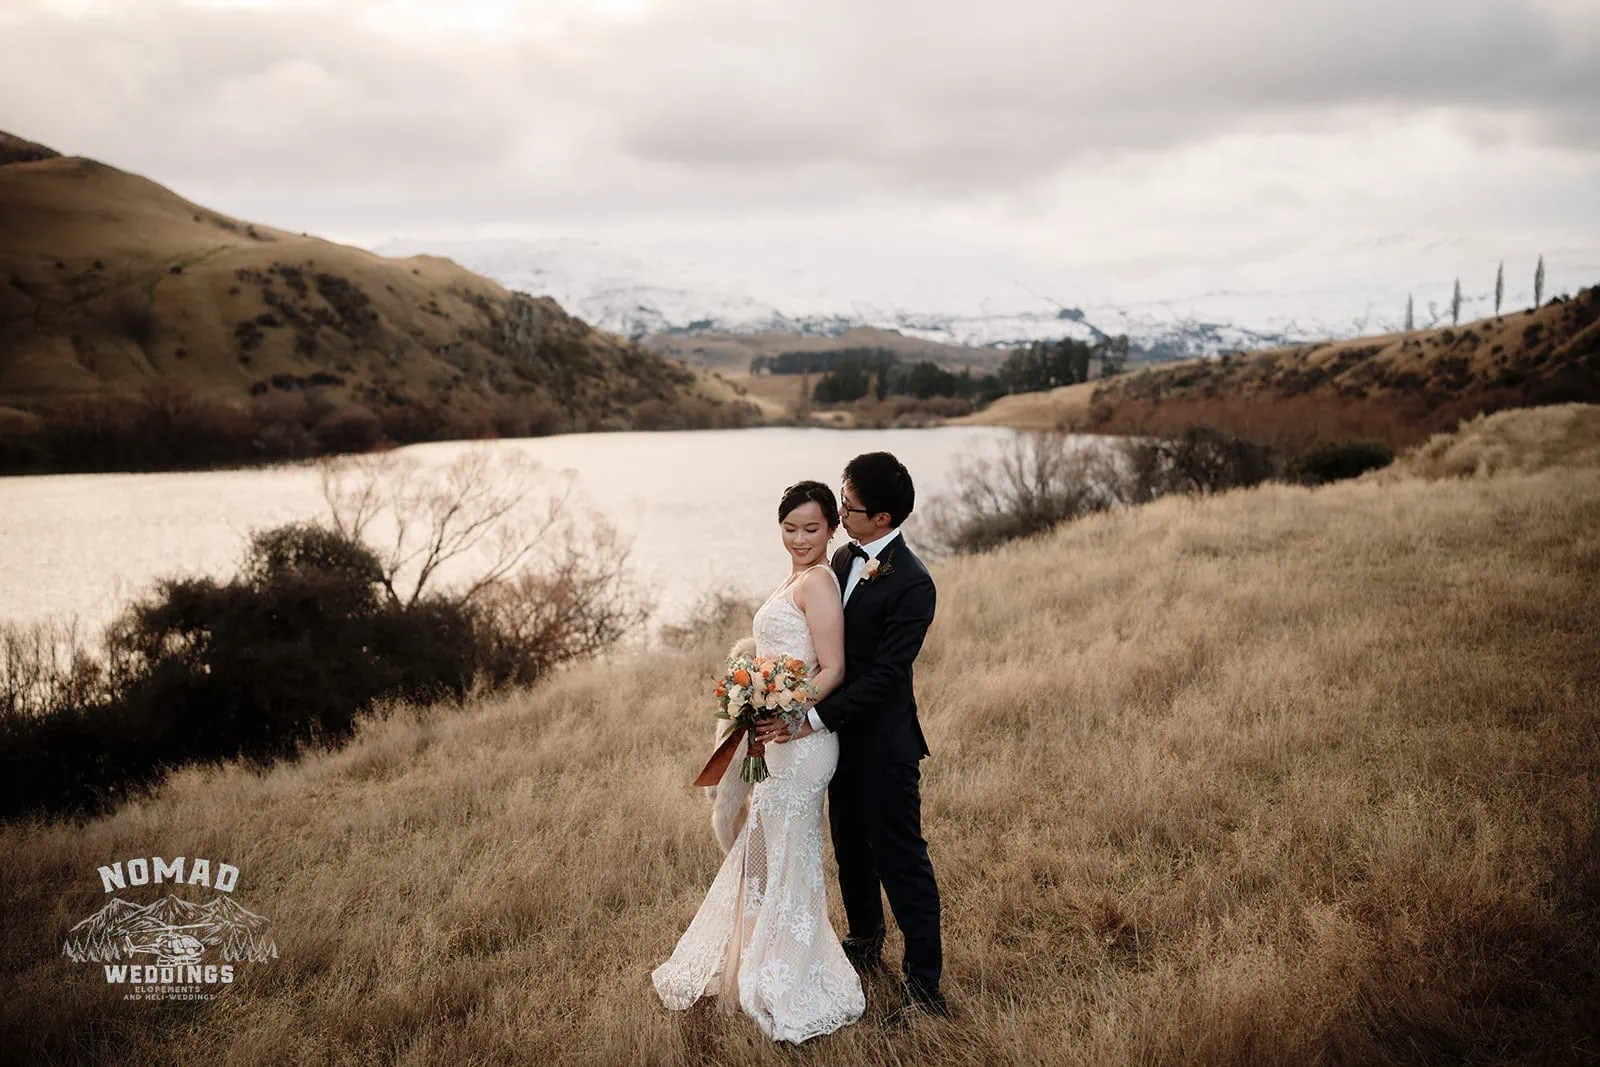 Joanna and Tony posing for their pre-wedding shoot in the scenic fields near a lake in Queenstown, New Zealand.